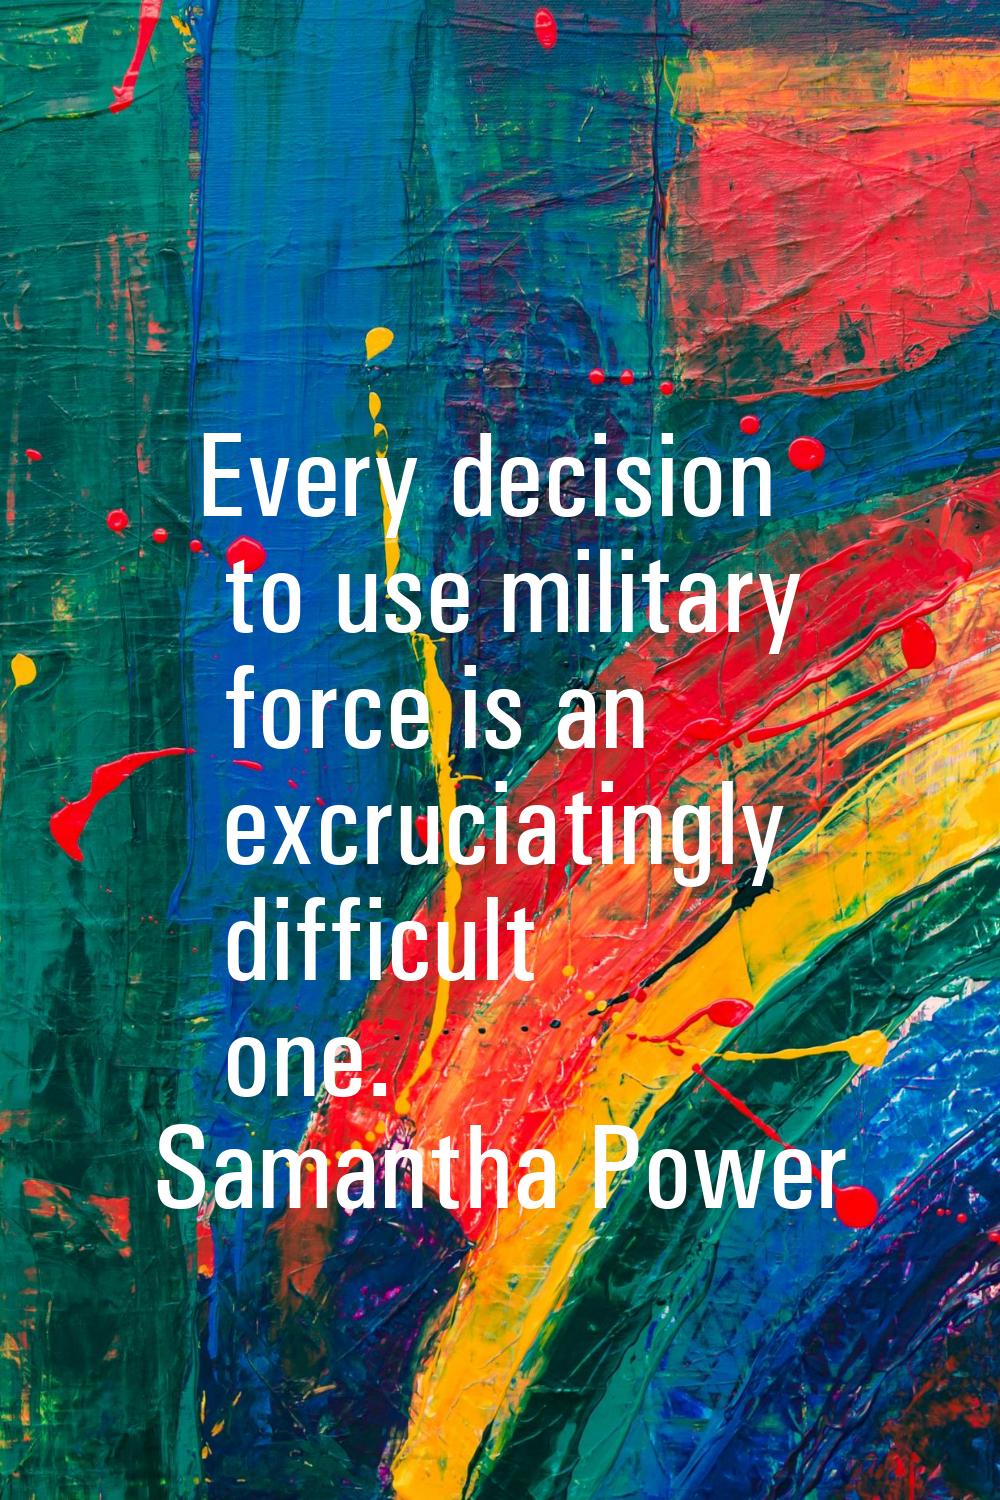 Every decision to use military force is an excruciatingly difficult one.